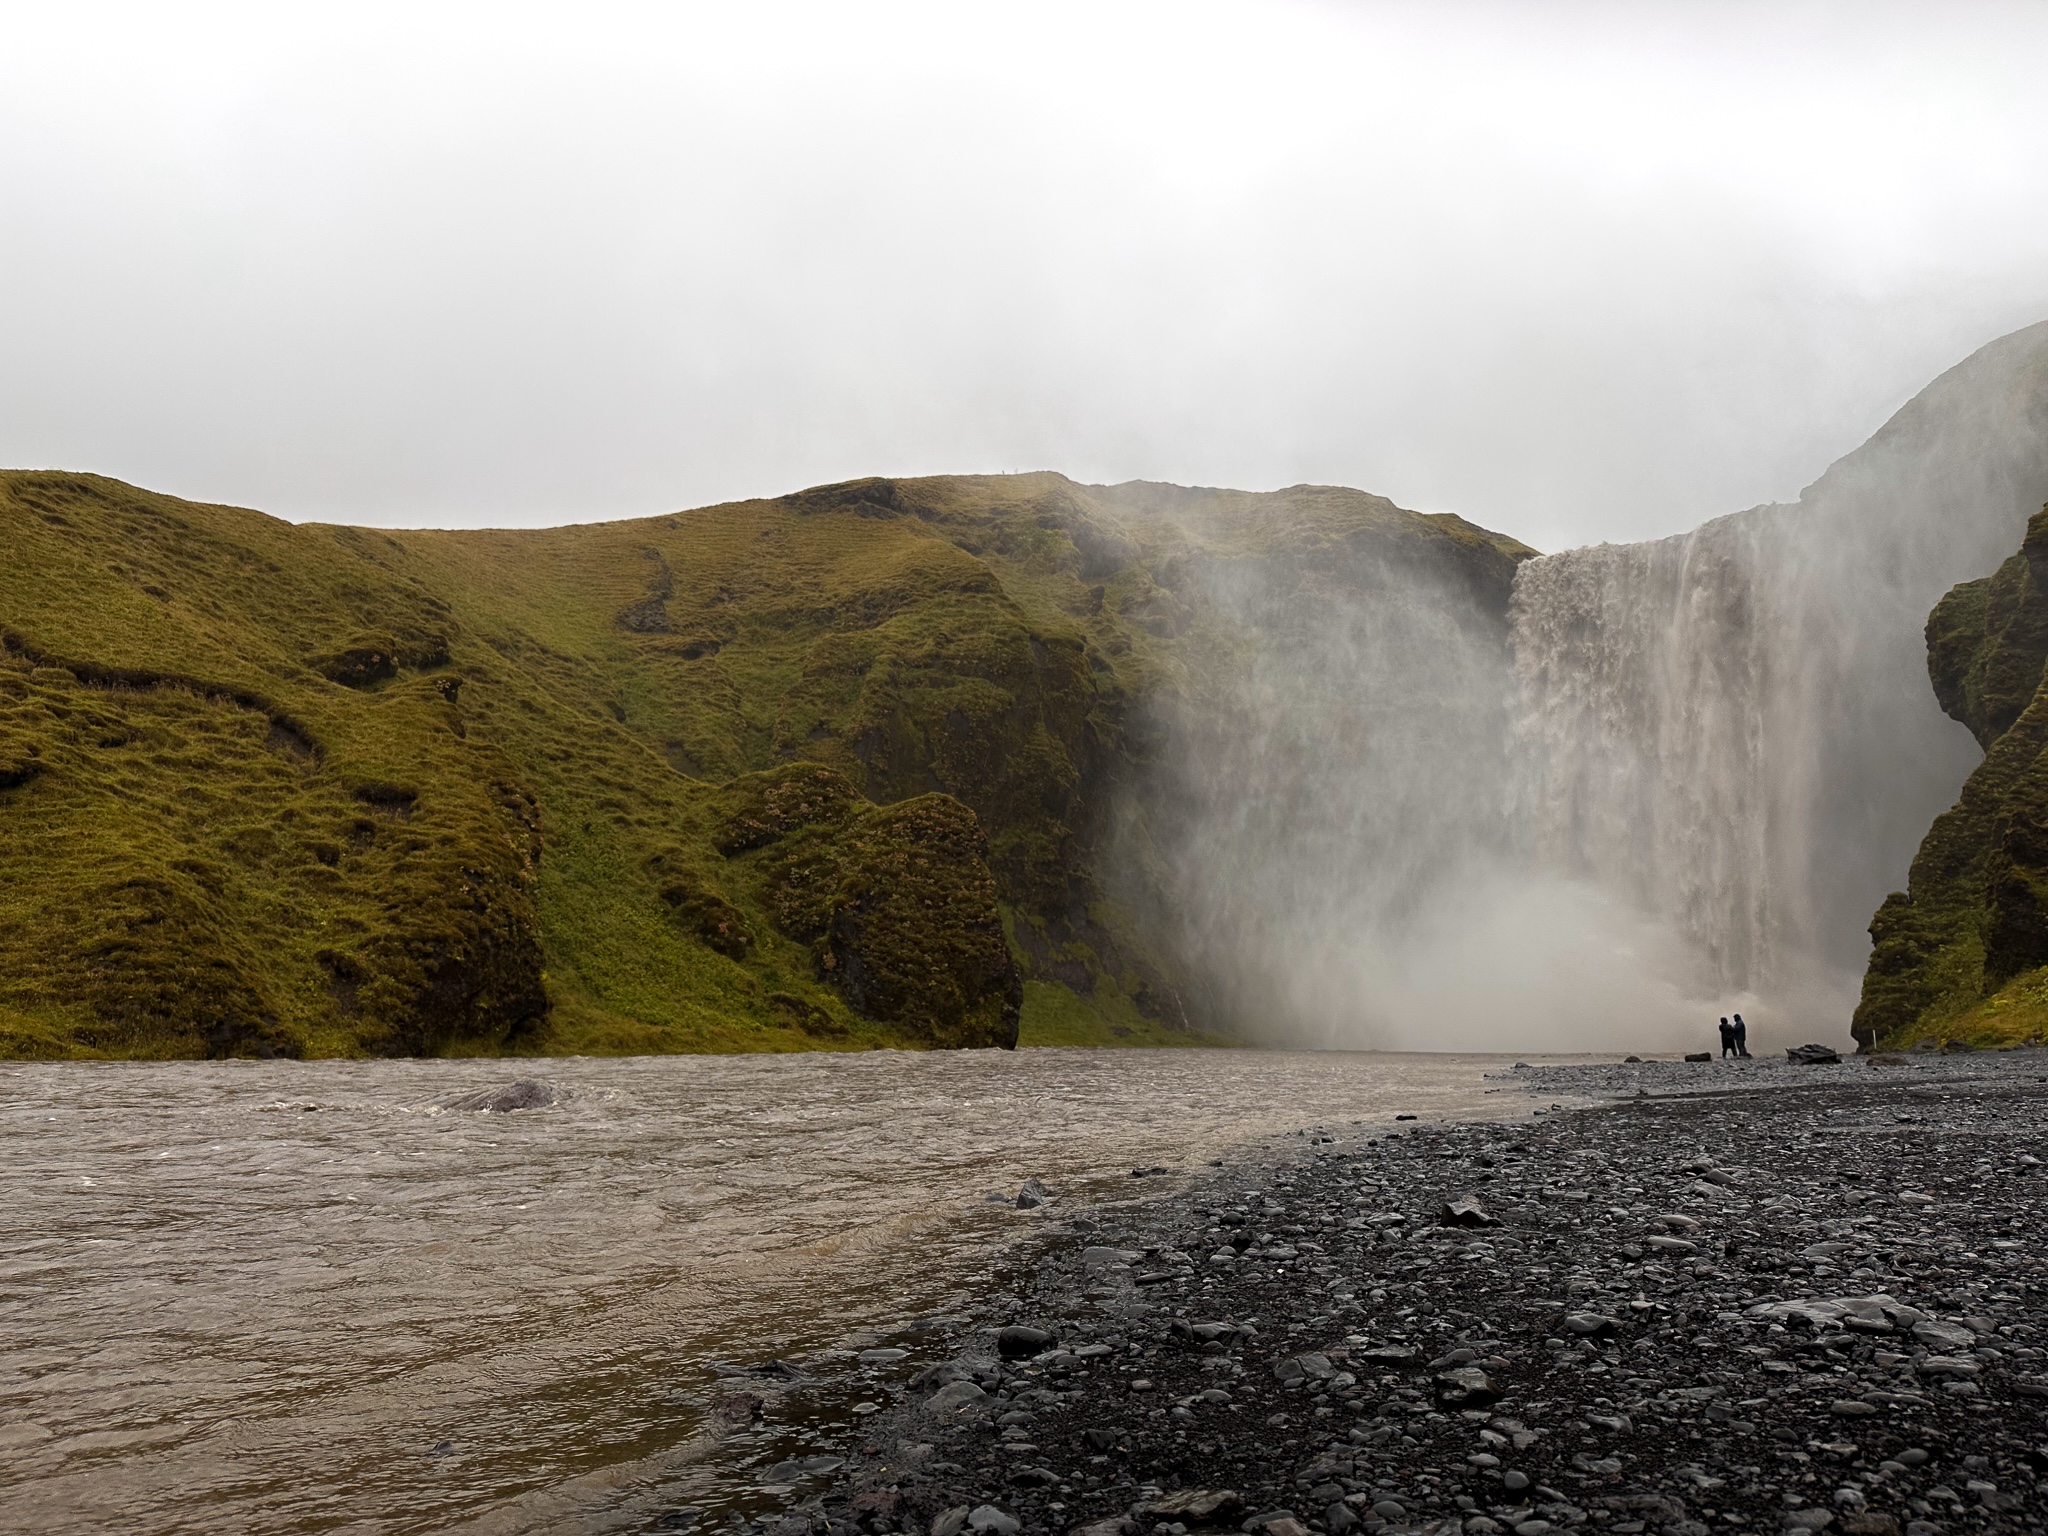 Skogafoss (waterfall) in the rain is brown with a white overcast sky